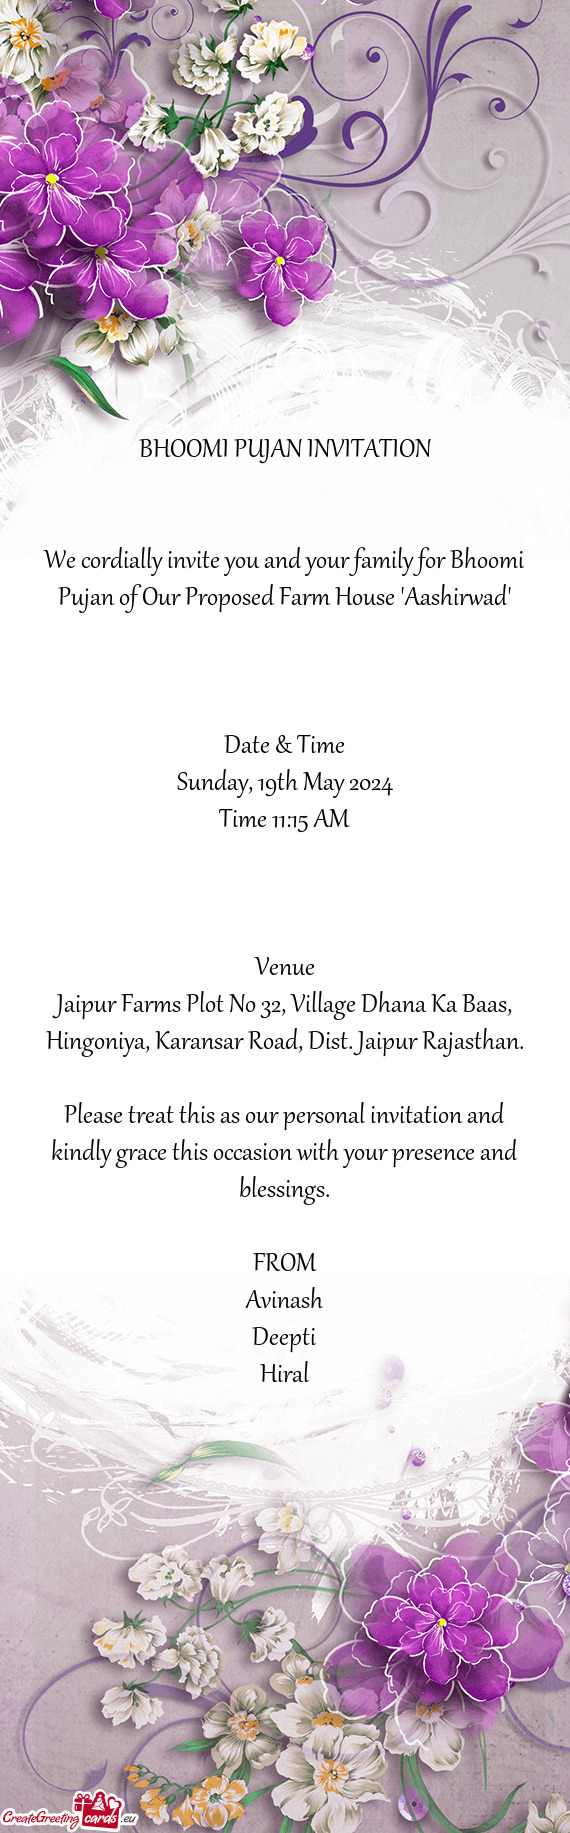 We cordially invite you and your family for Bhoomi Pujan of Our Proposed Farm House 